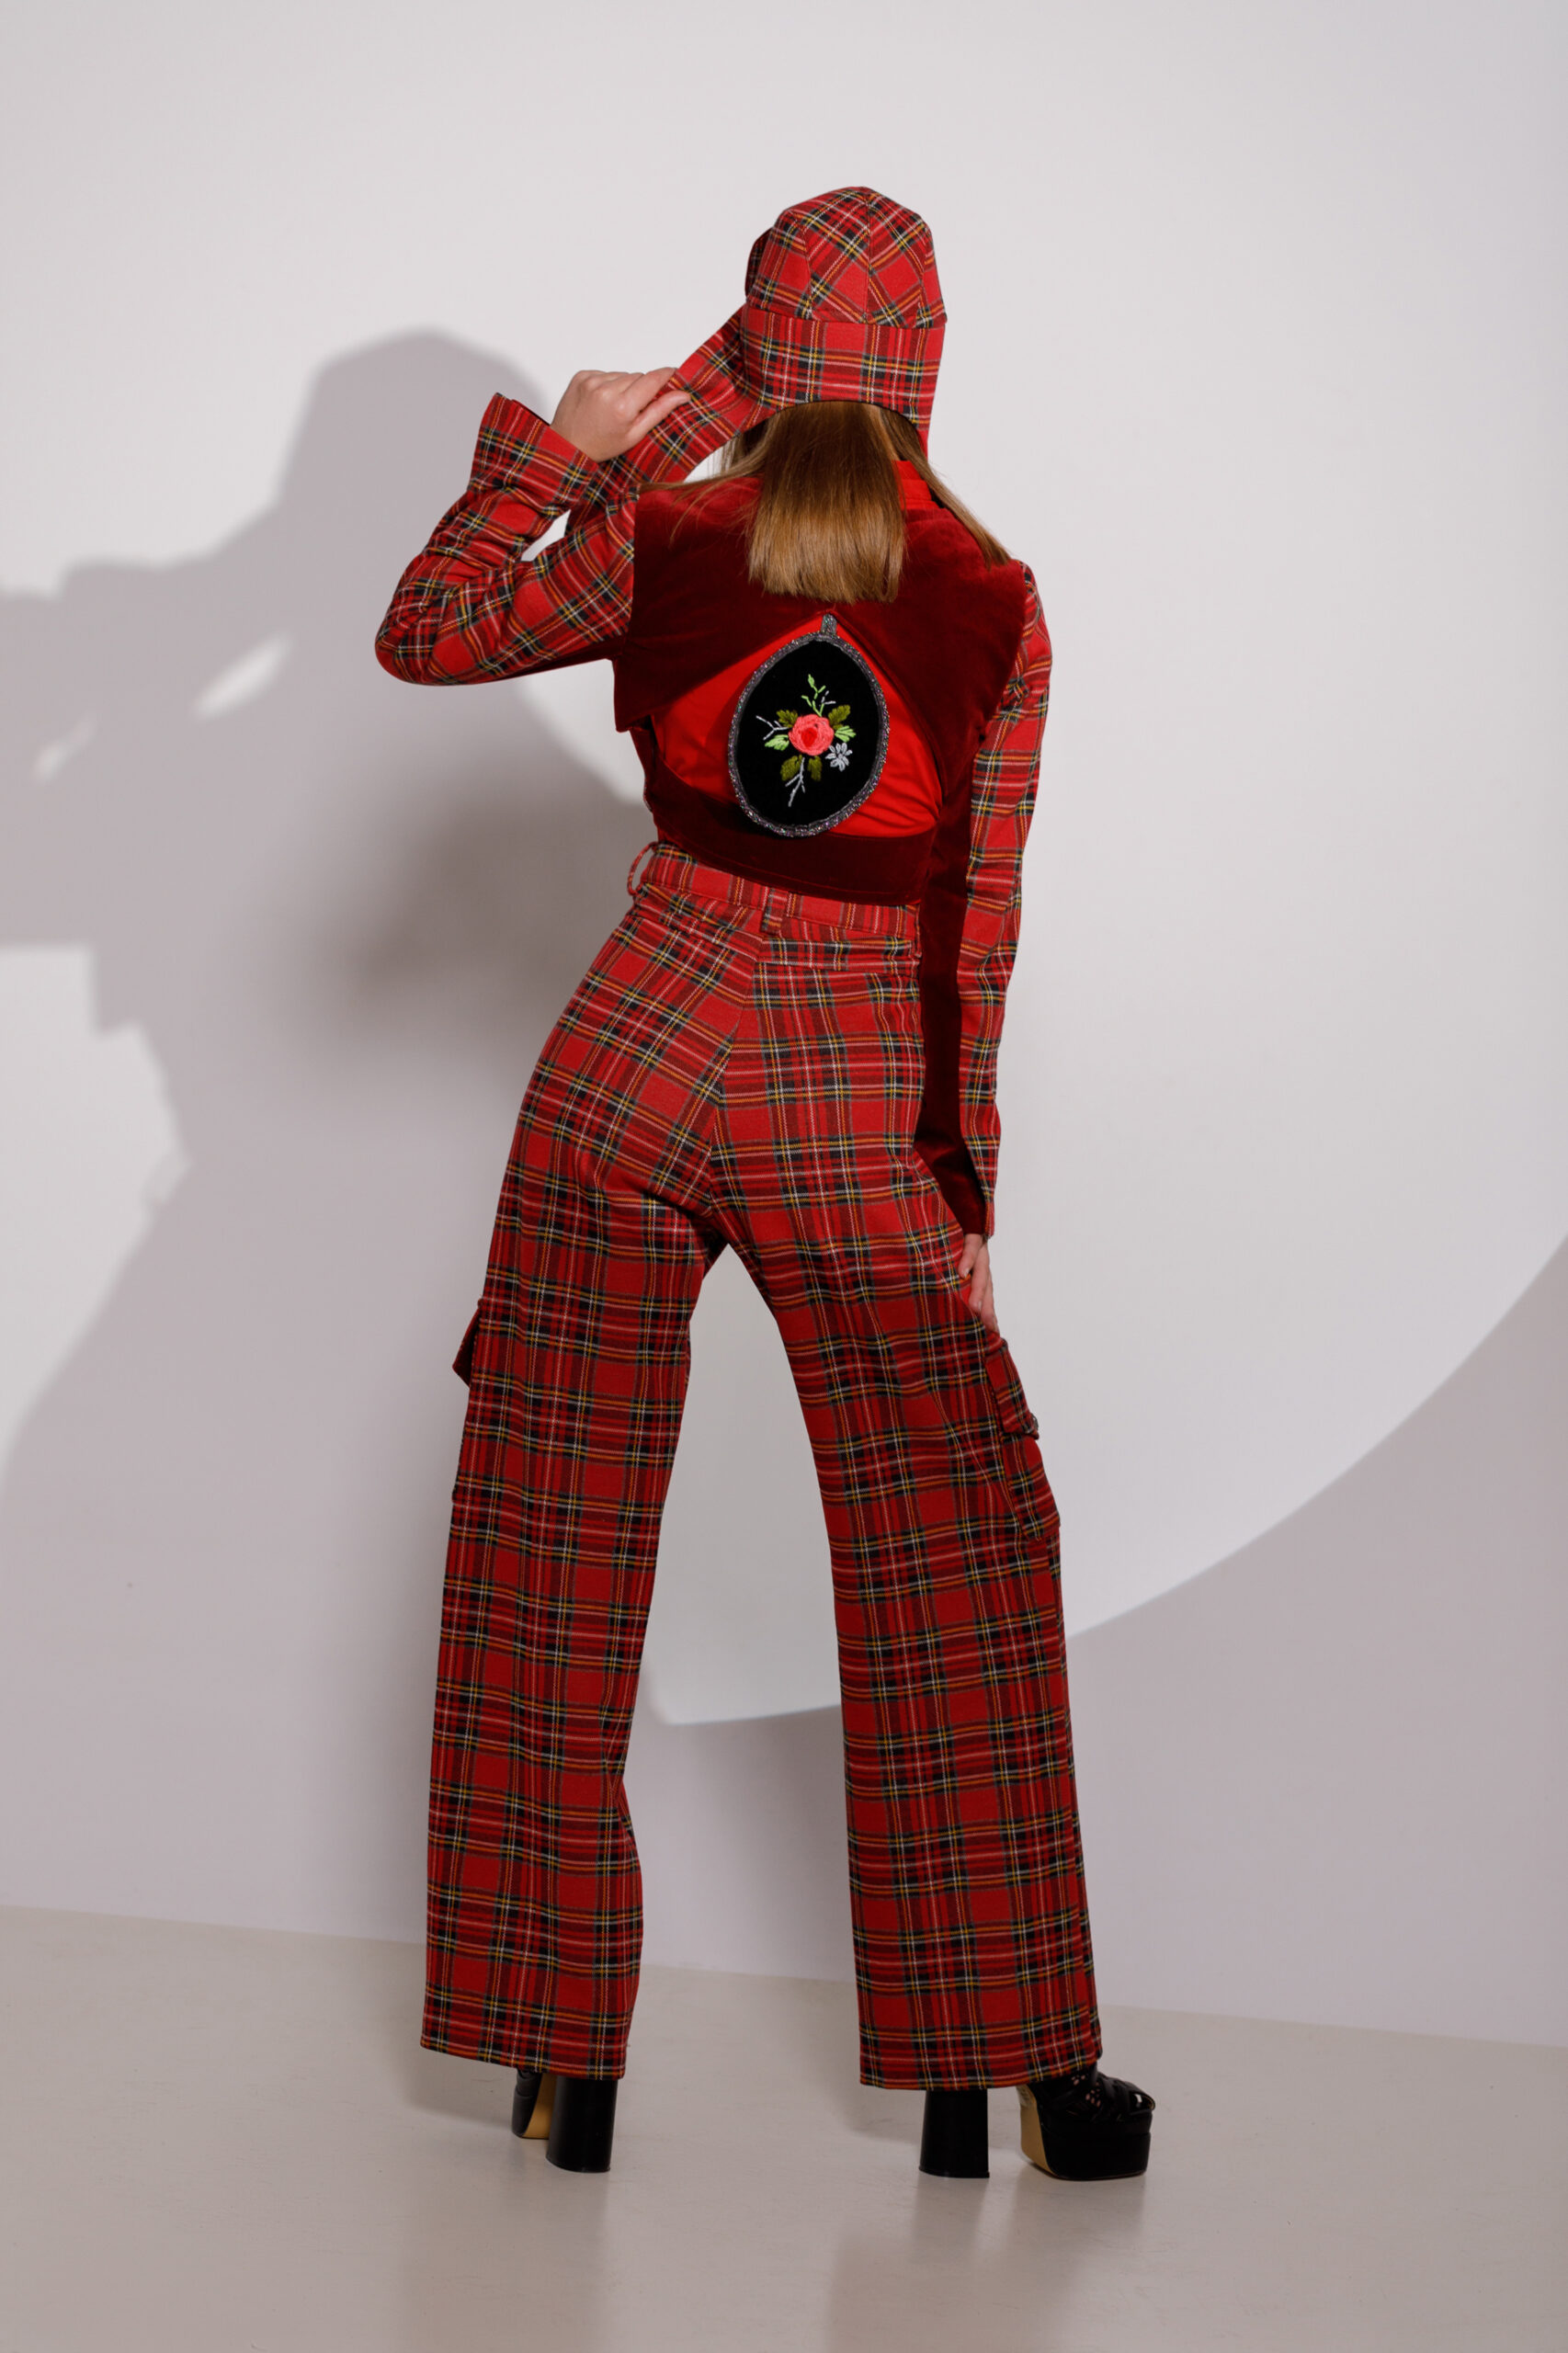 Casual ROWAN trousers in red and green check fabric. Natural fabrics, original design, handmade embroidery